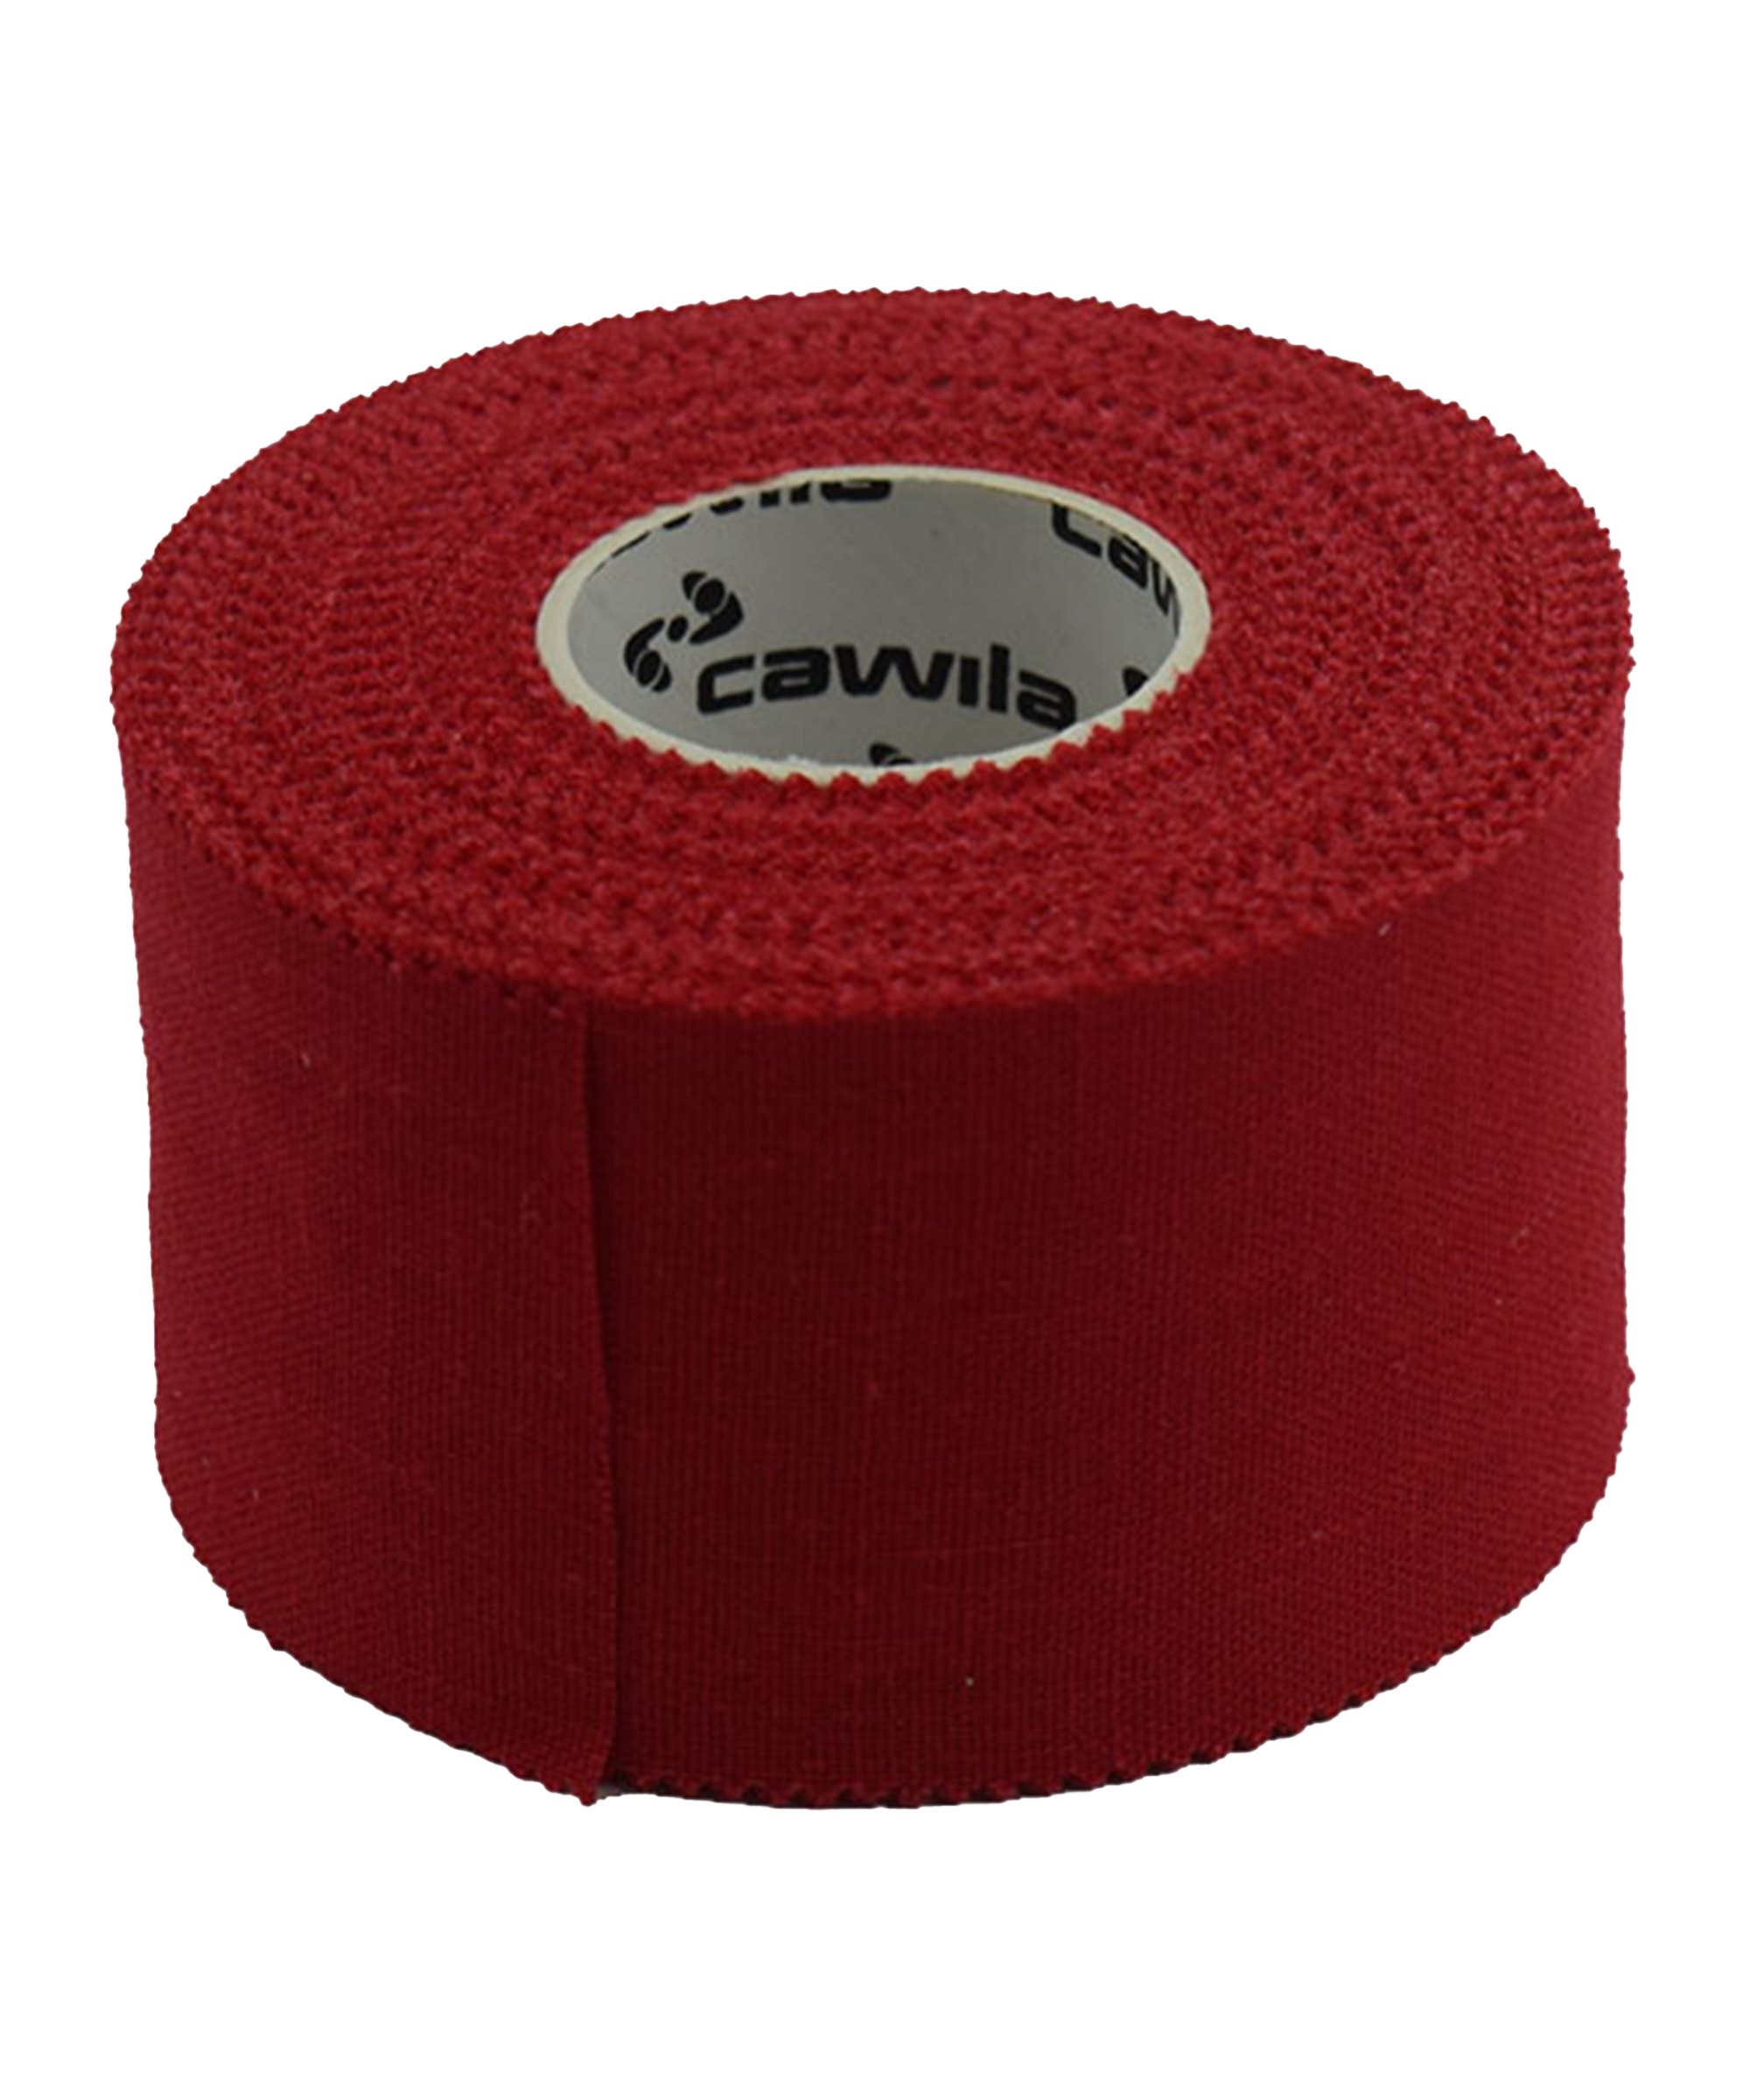 Cawila Color Tape 10 Meter 3,8 cm breit Rot - rot